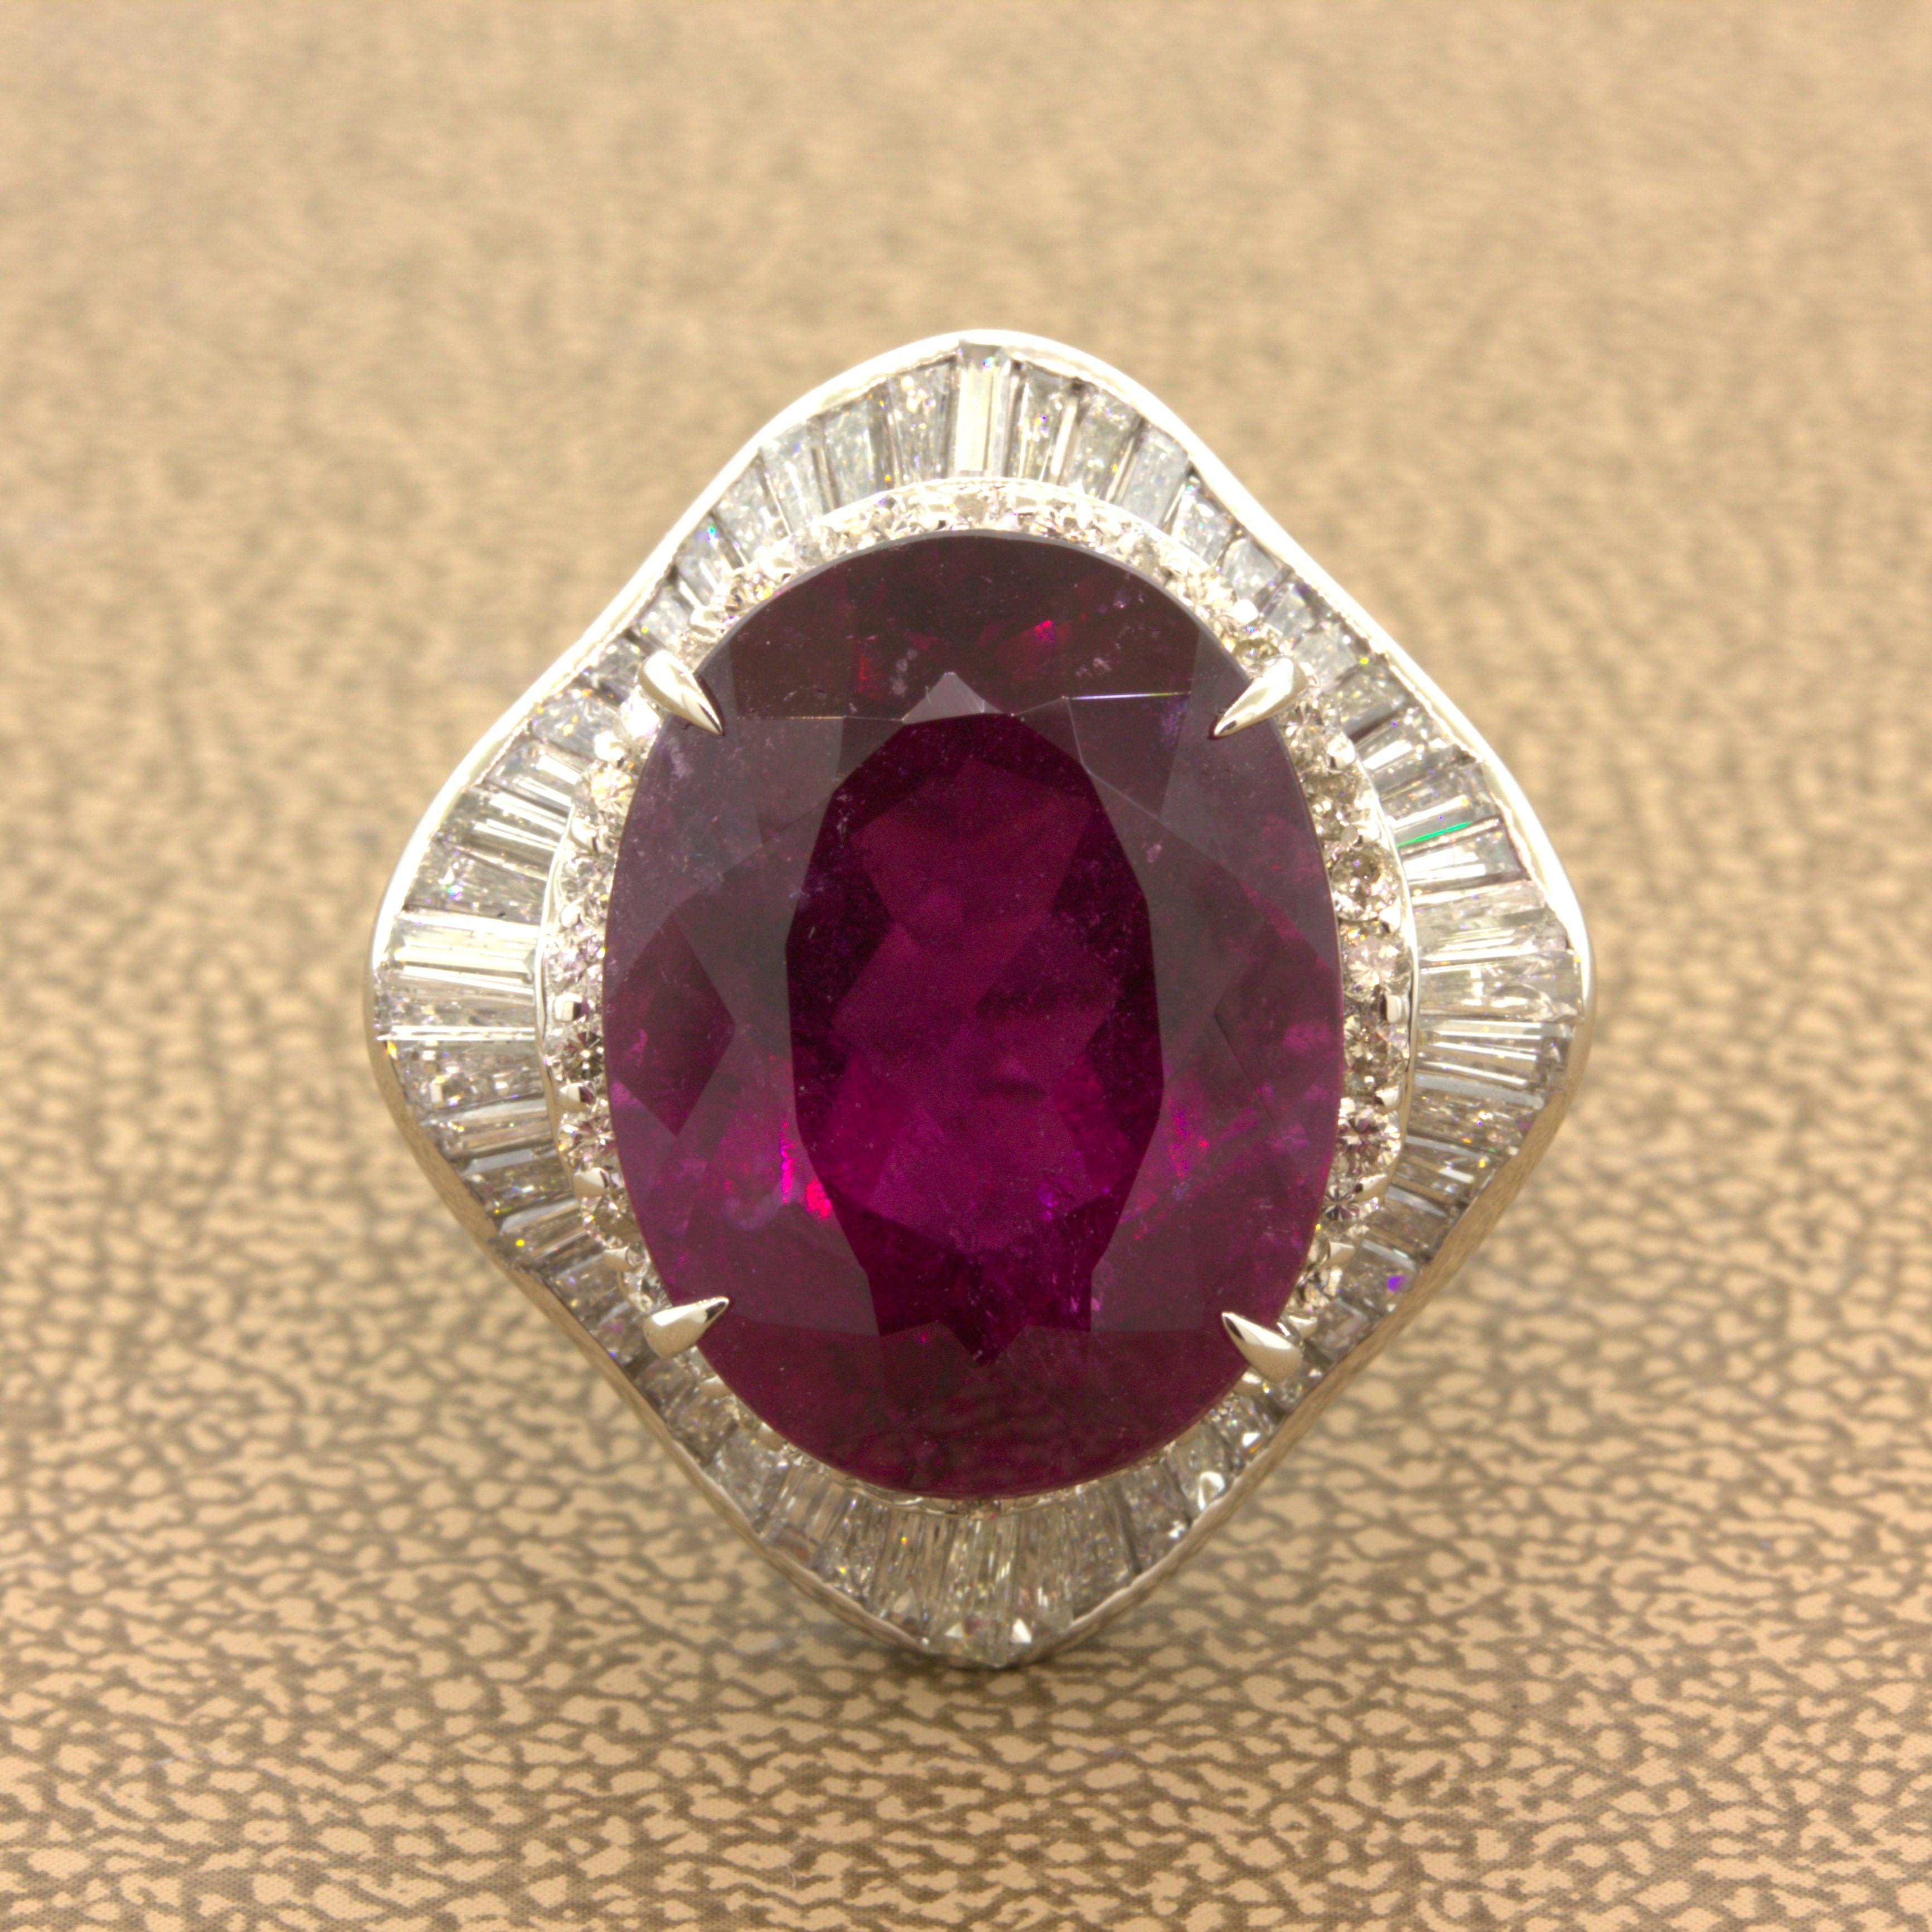 A lovely platinum ring featuring a beautiful razzberry rubellite tourmaline. It weighs 13.61 carats and has a sweet oval shape. While the stone is included, it makes up for it with its deep rich color that glows in the light. It is complemented by